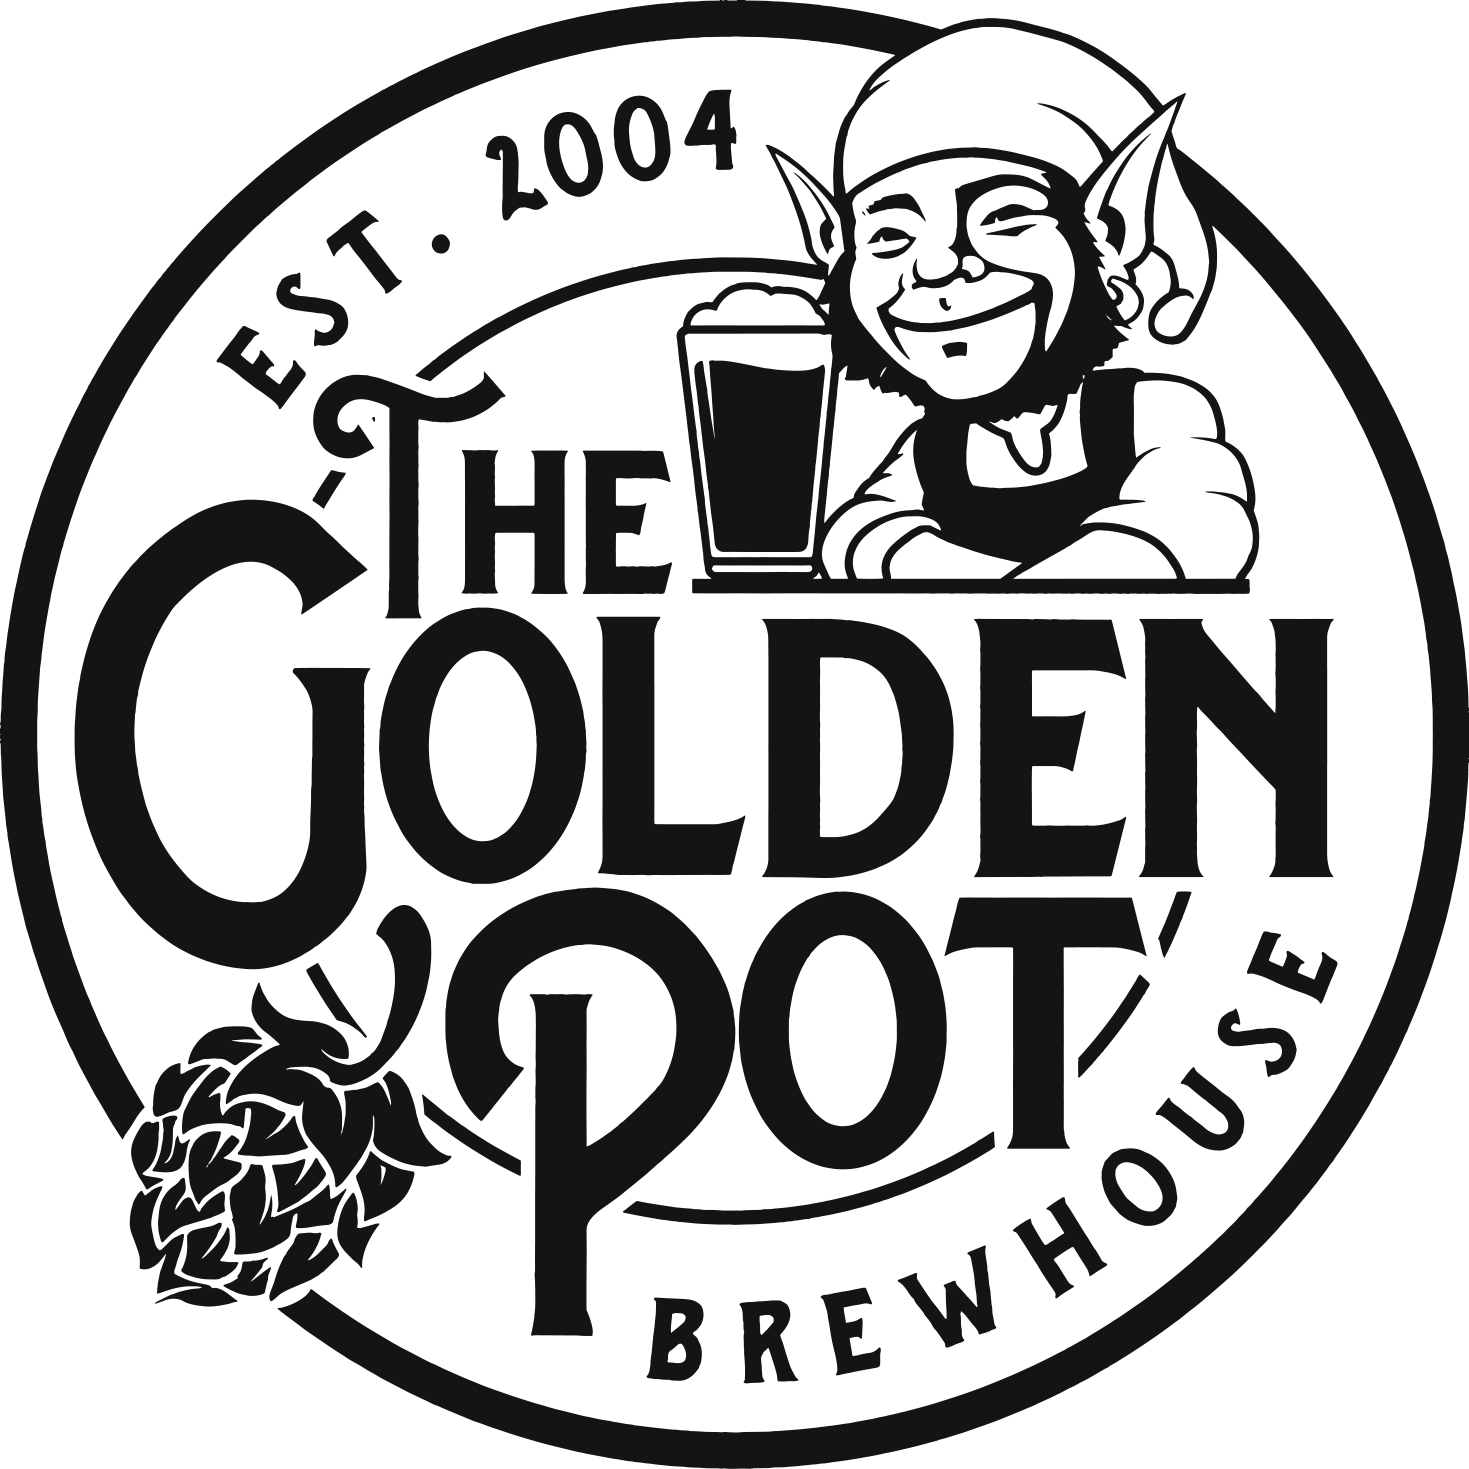 The Golden Pot Brewhouse